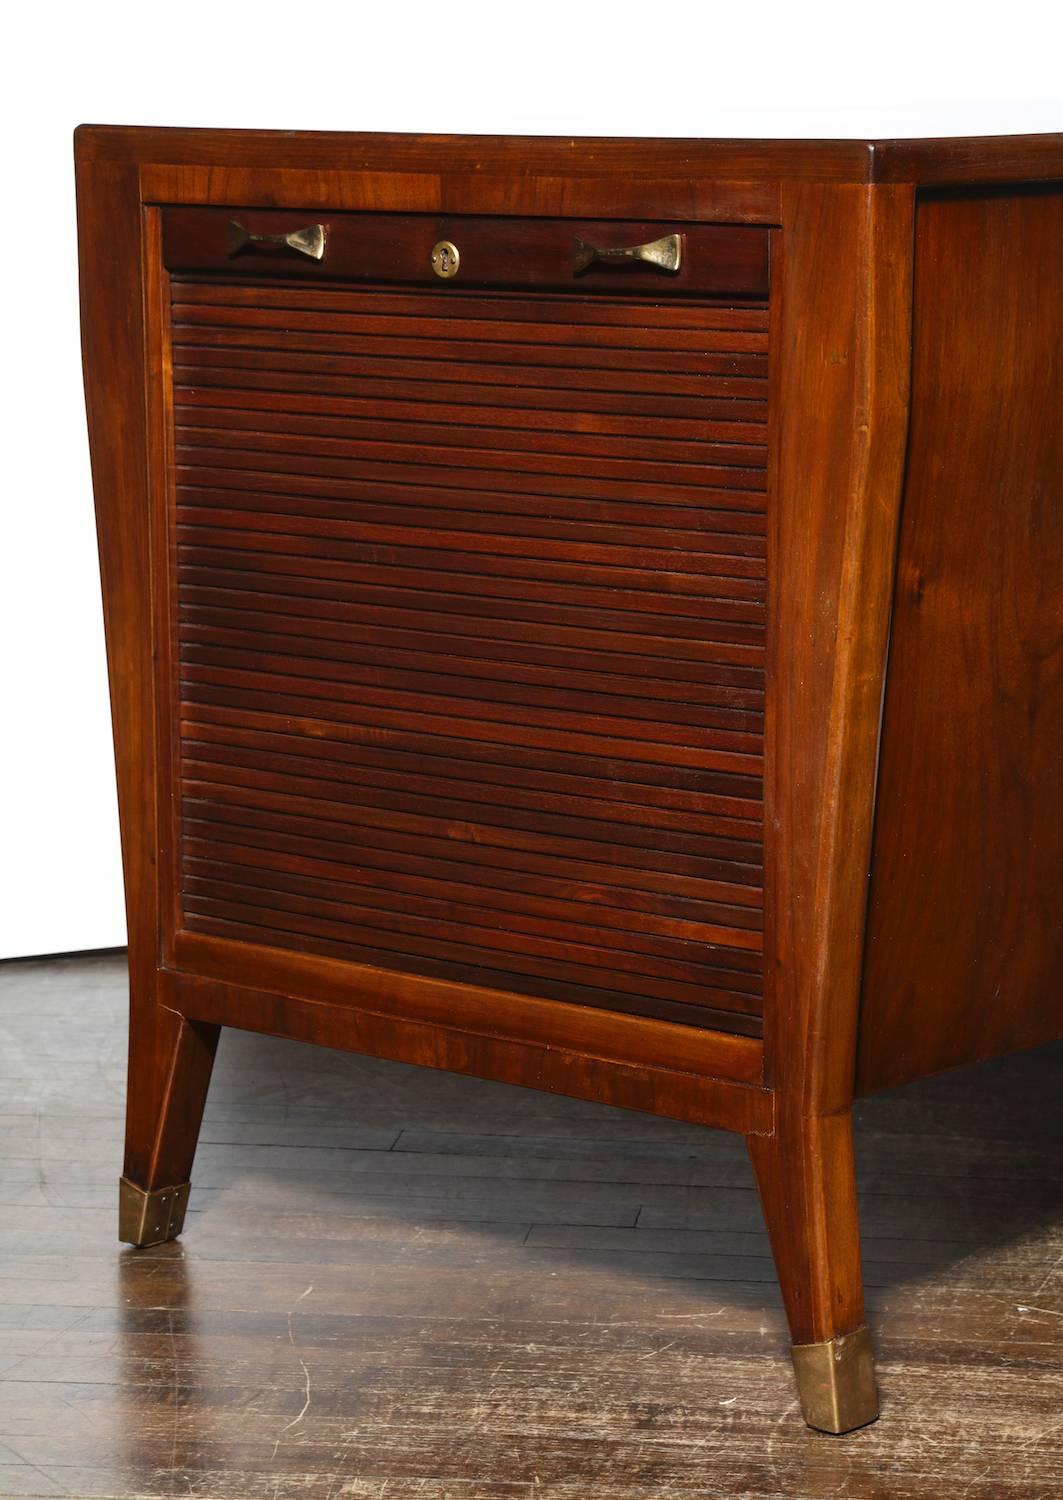 Gio Ponti elegant writing table/ desk. Rare walnut desk with single center drawer. Side storage shelves concealed by tambour panels. Brass handles and sabots. Produced by Schirolli of Montova, Italy. This desk has been authenticated and registered